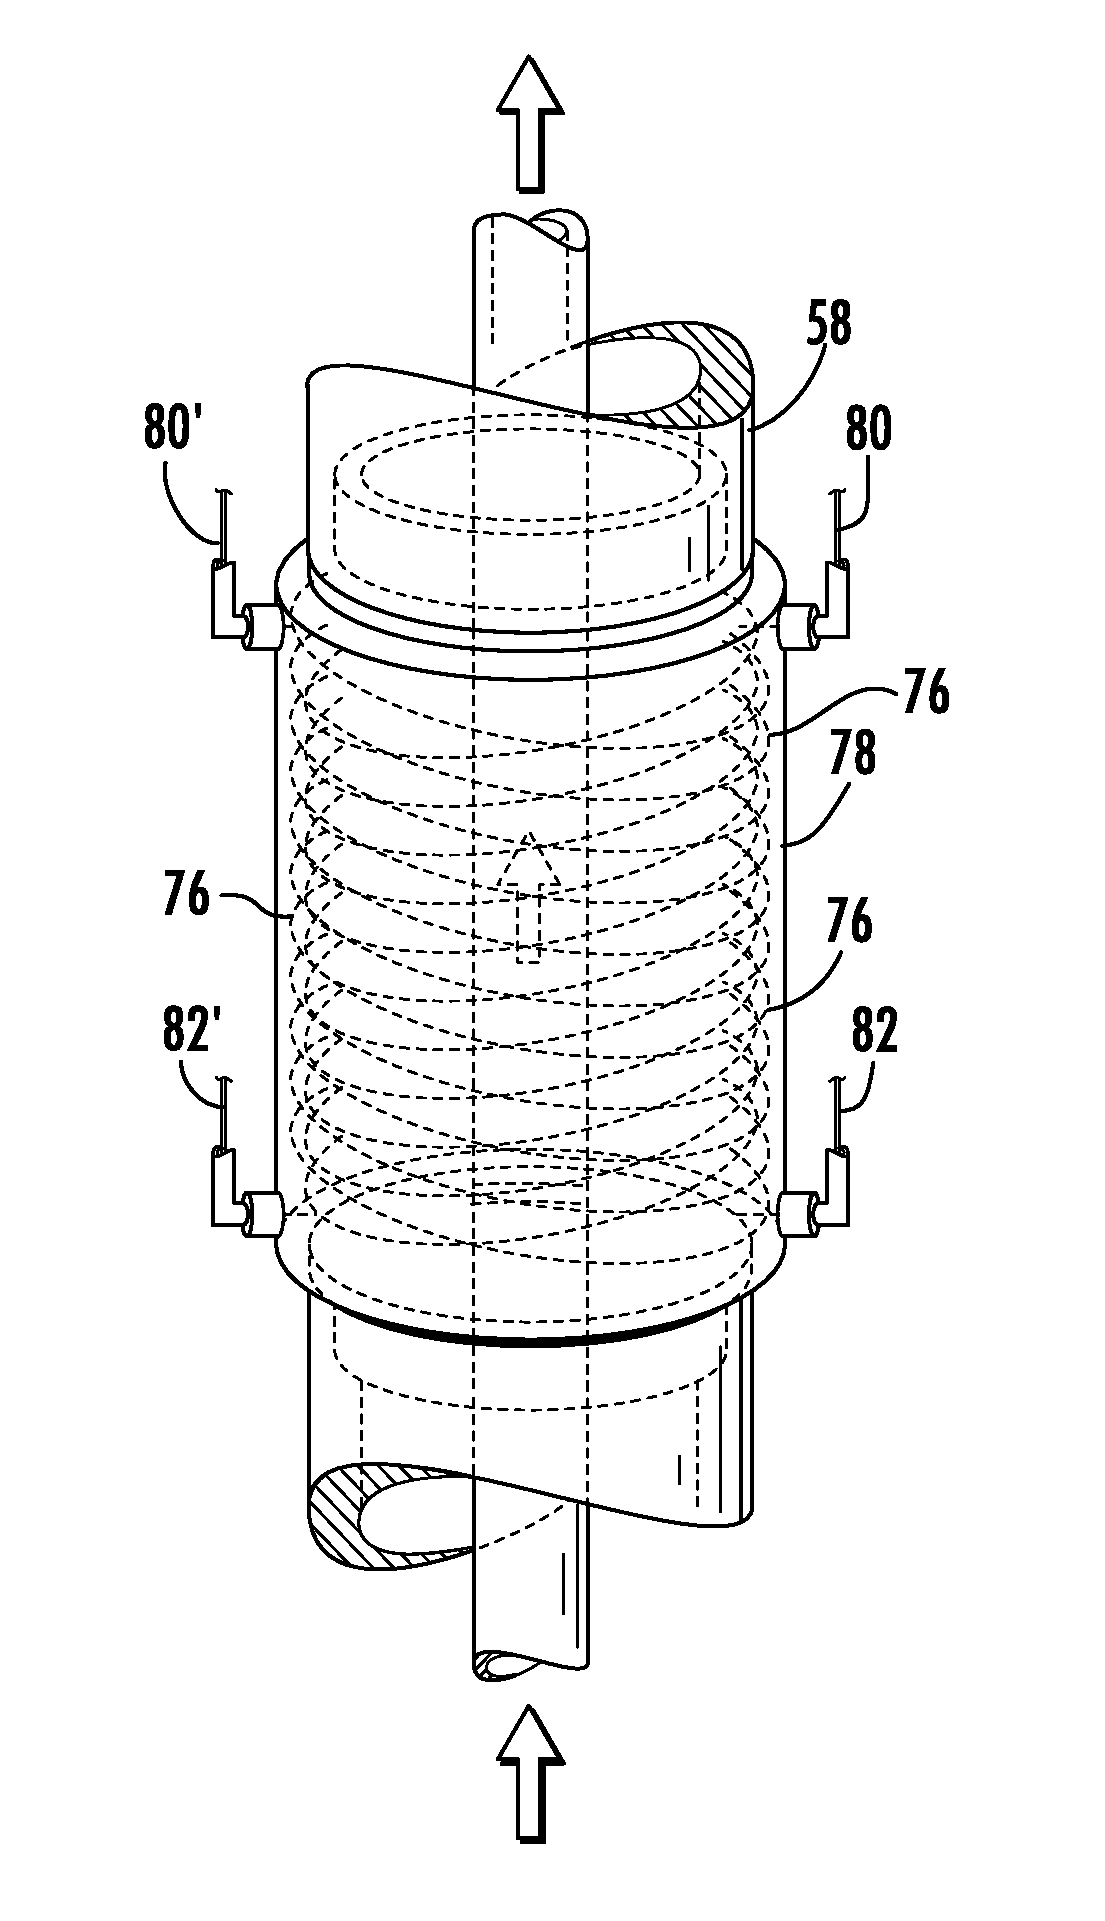 Apparatus and method for magnetically conditioning fluids